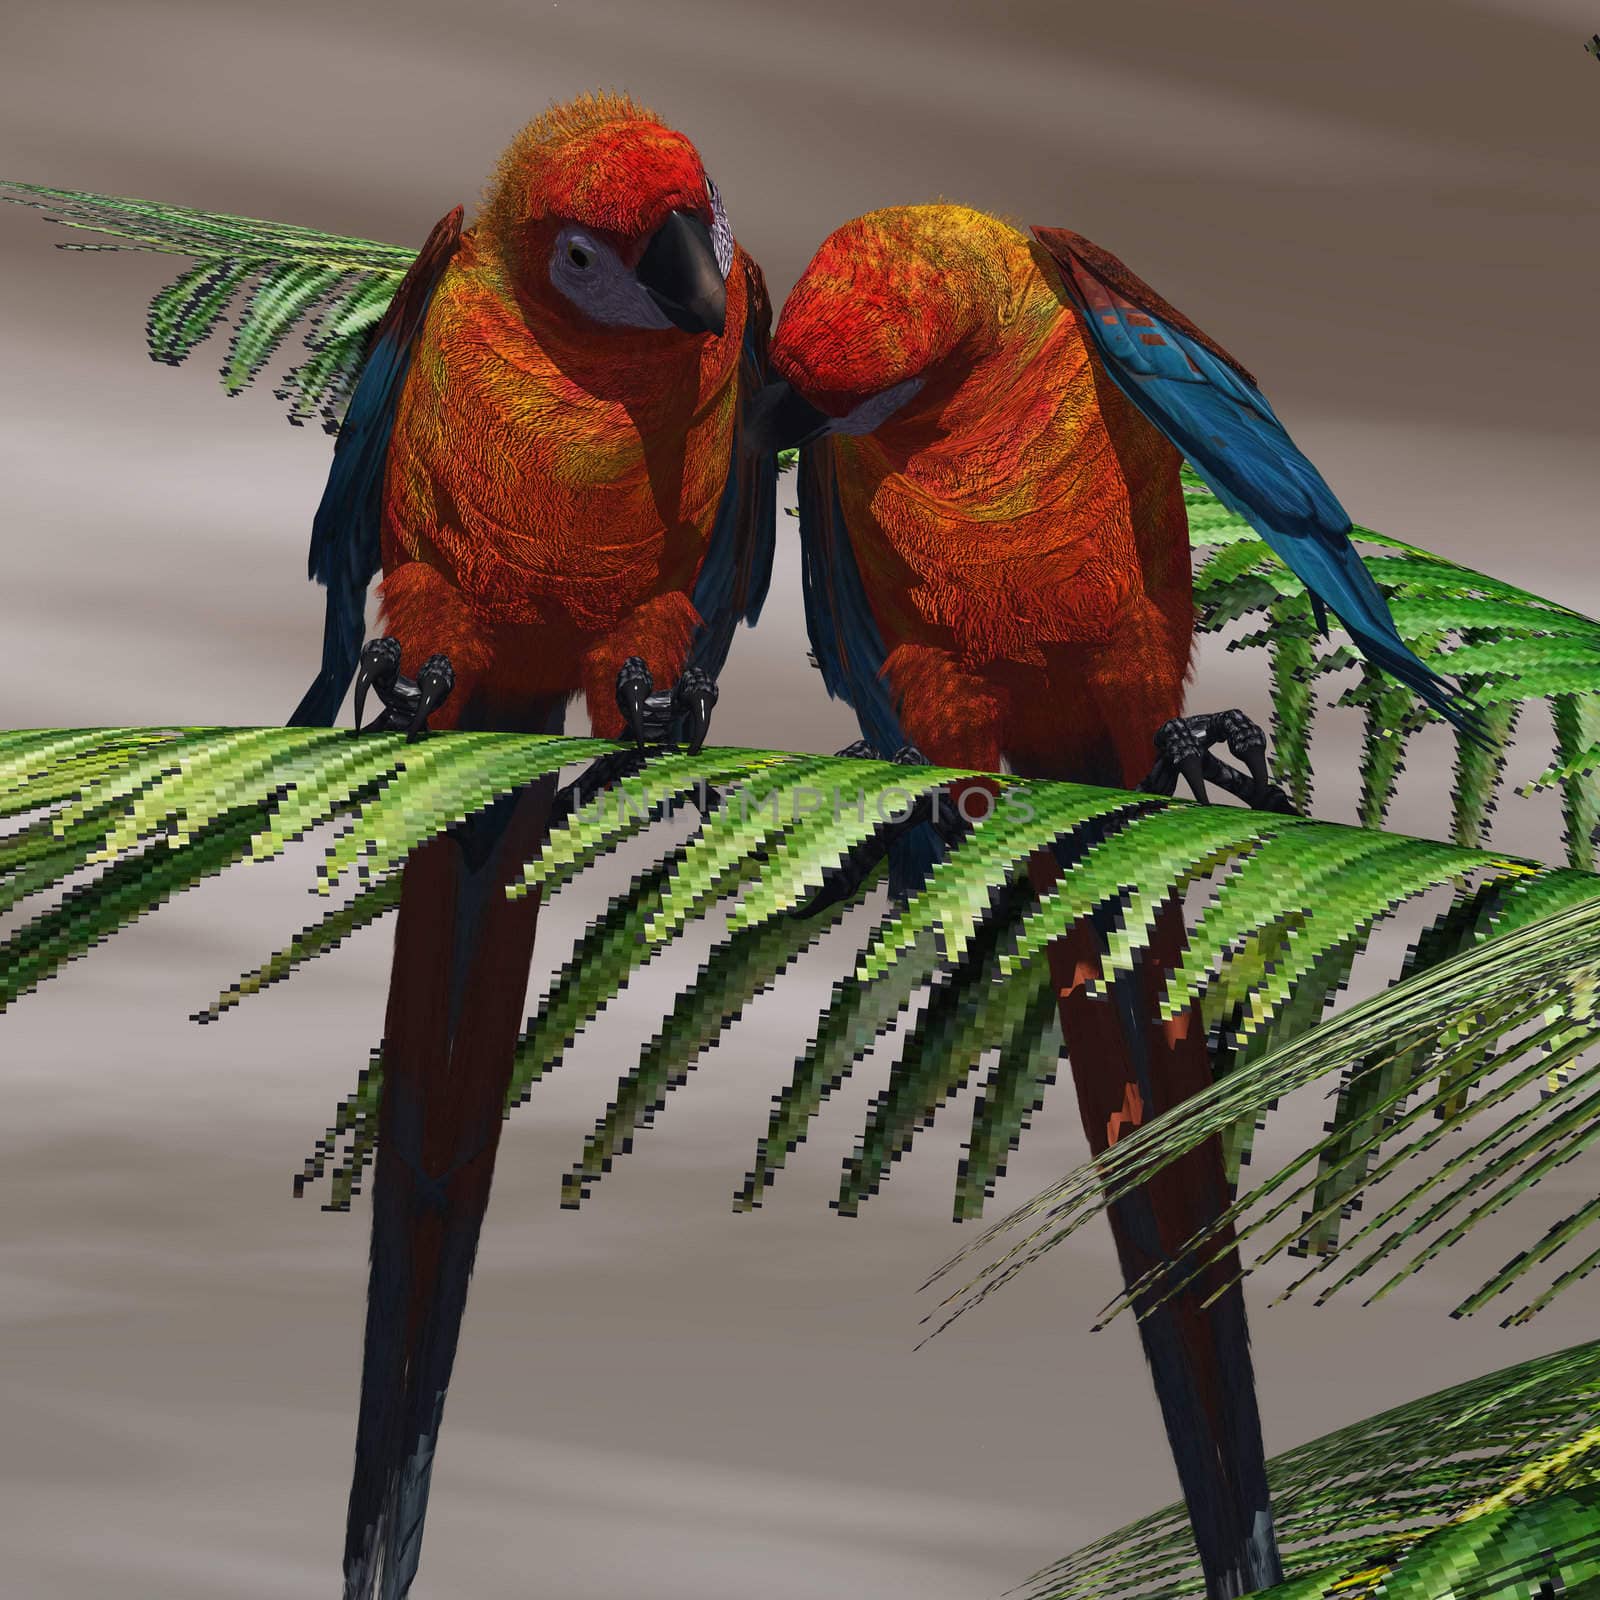 Two Cuban Red Macaws have a close bond and are tender with each other.